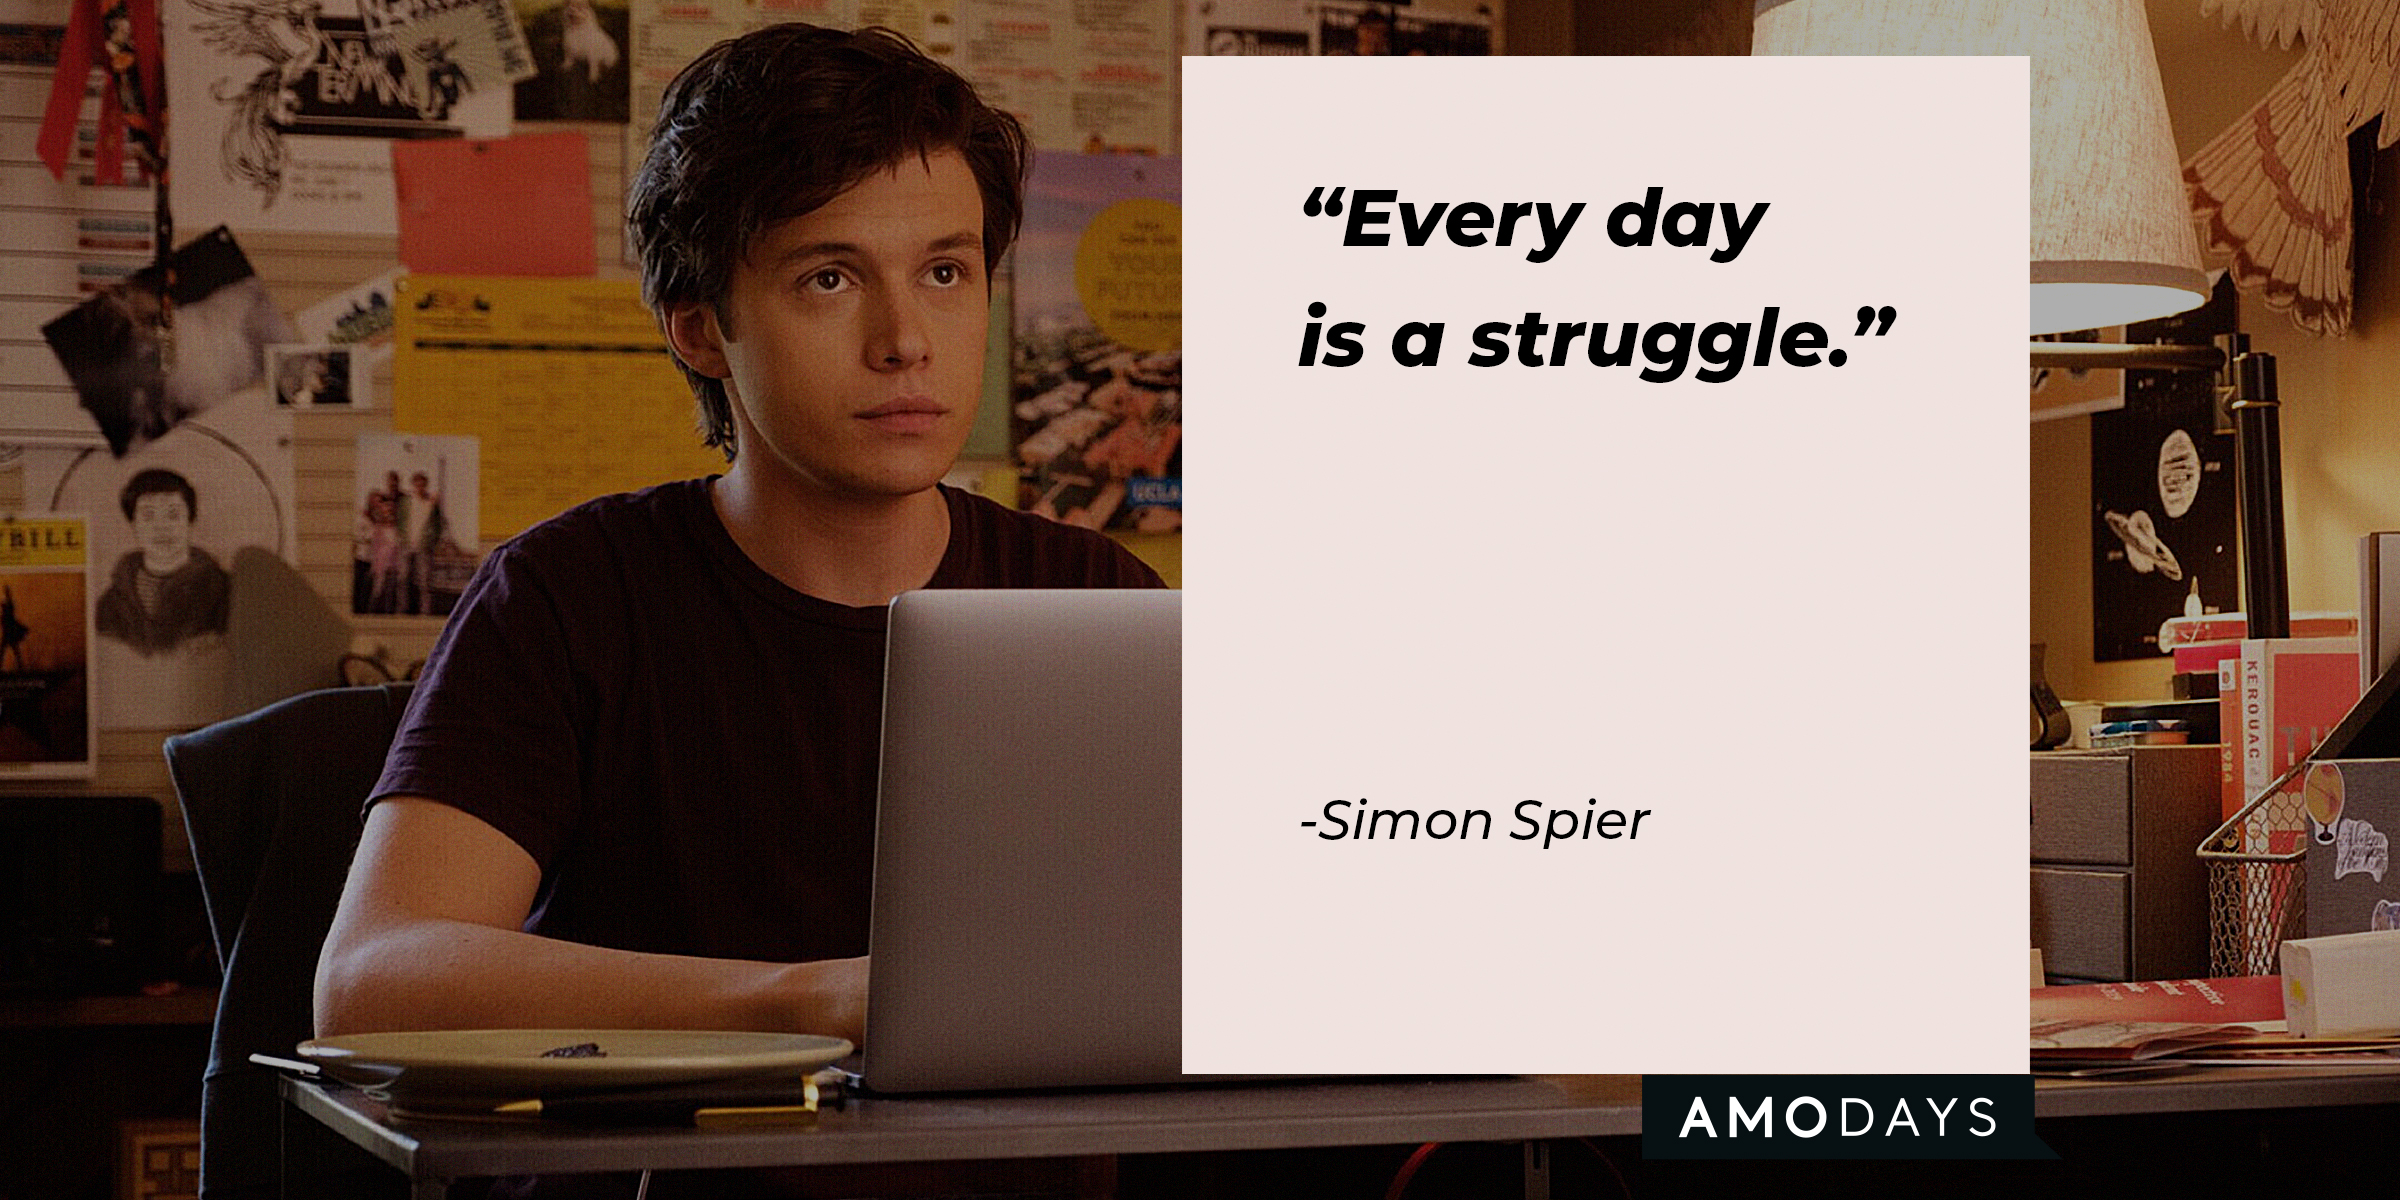 Simon Spier's quote, "Every day is a struggle." | Source: facebook.com/LoveSimonMovie